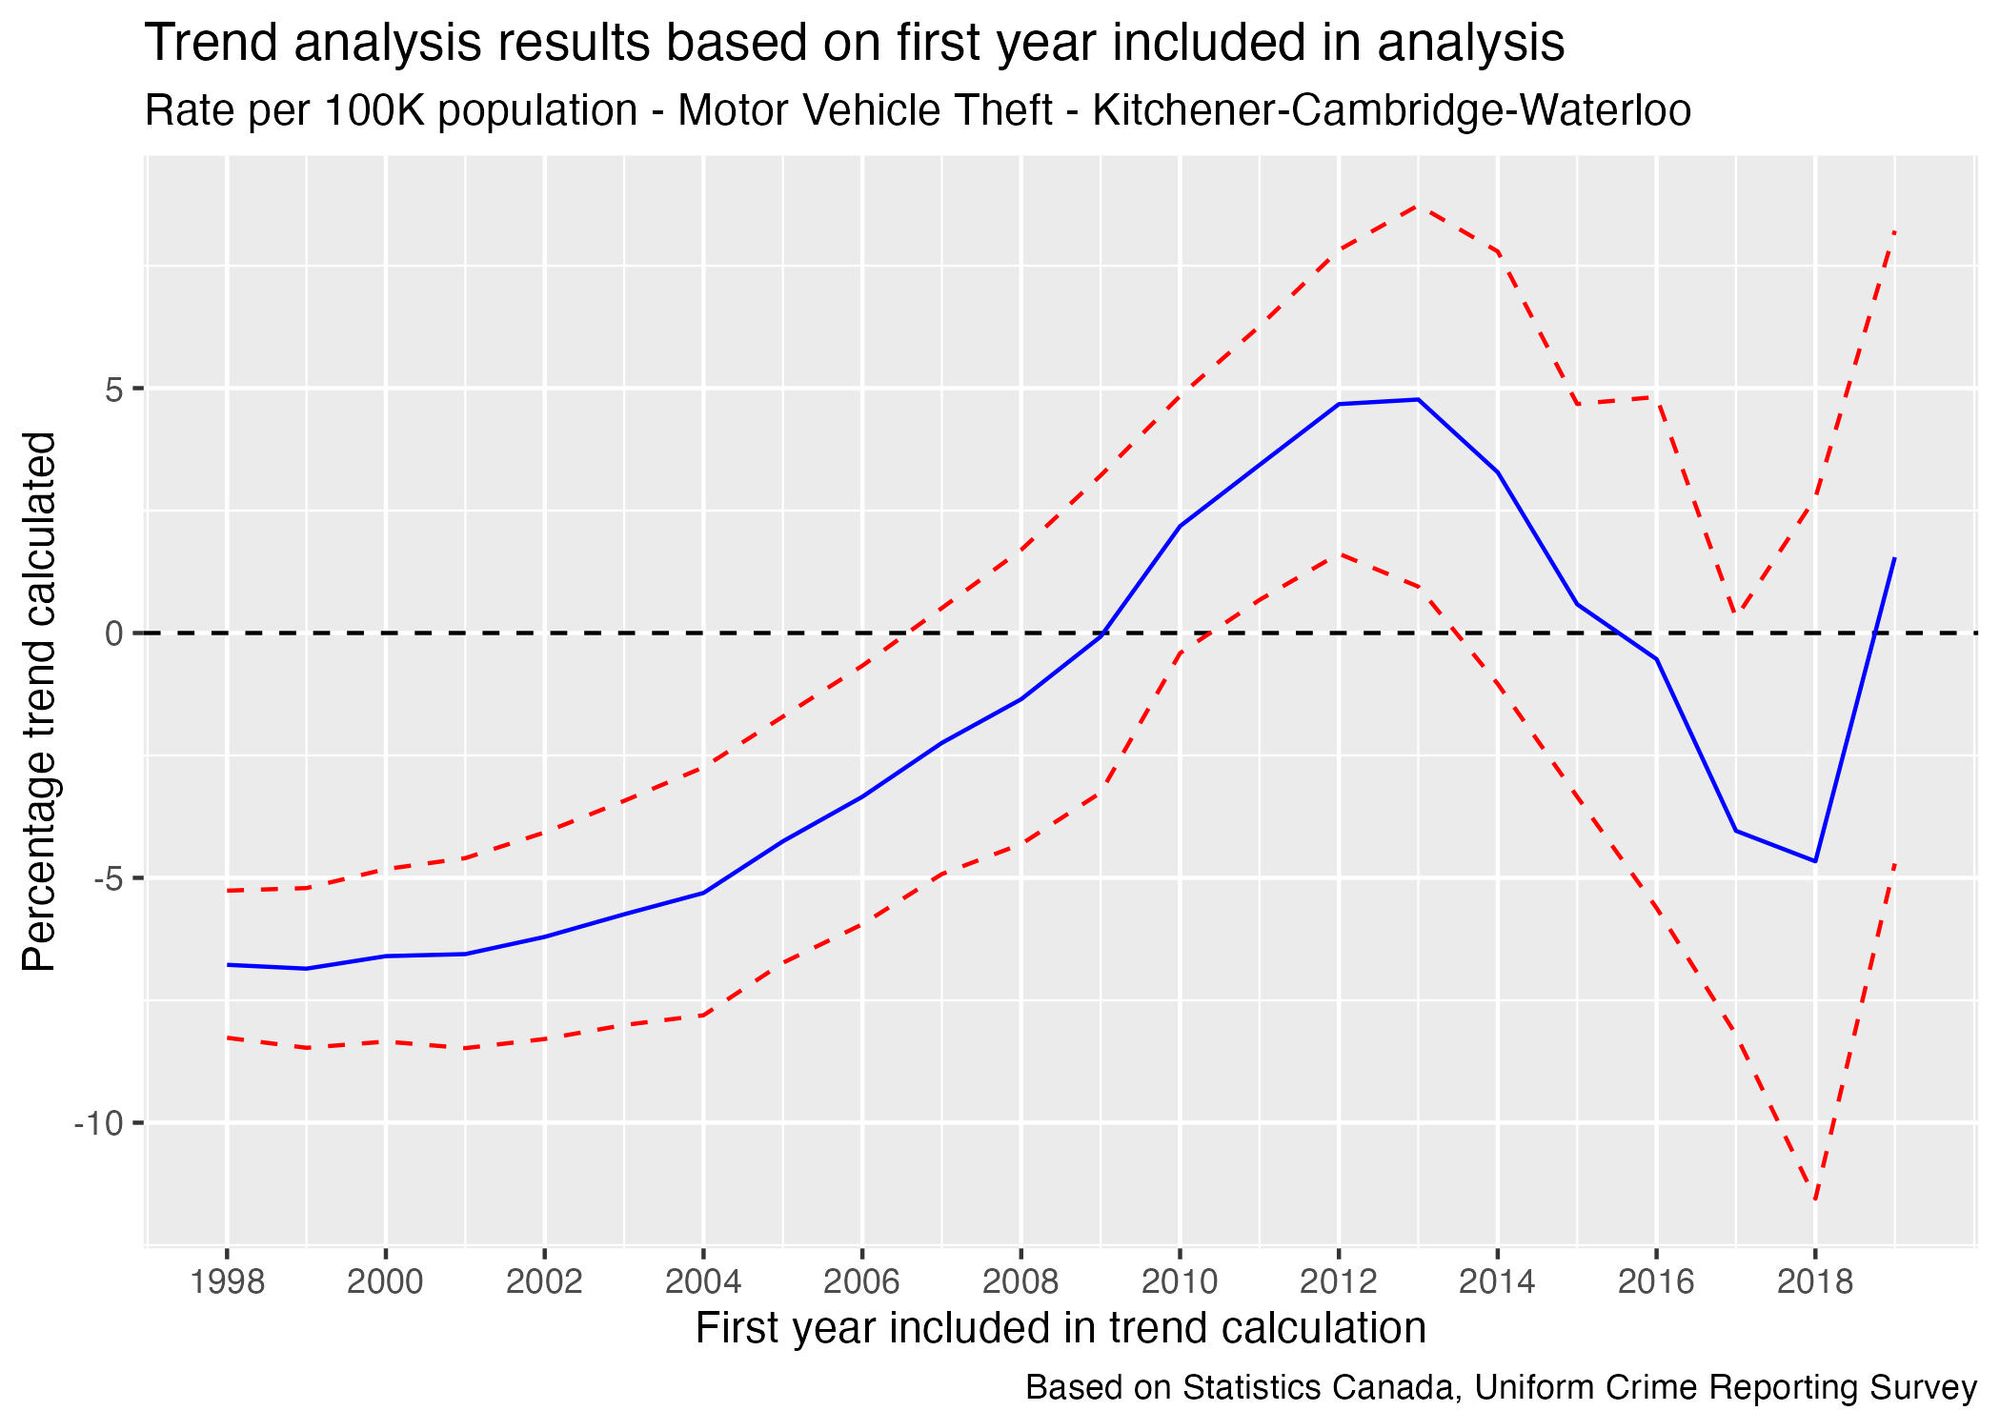 A graph of “Trend analysis results based on first year included in analysis” for “Rate per 100K population – Motor Vehicle Theft – Kitchener-Cambridge-Waterloo. It shows the “Percentage trend calculated” for each year between 1998 and 2019, inclusive. A solid blue line is surrounded by two dashed red lines. The blue line starts off around –6%, slowly increases to a value of +5% around 2012, and by 2015 is near zero. Further description is provided in the main article.